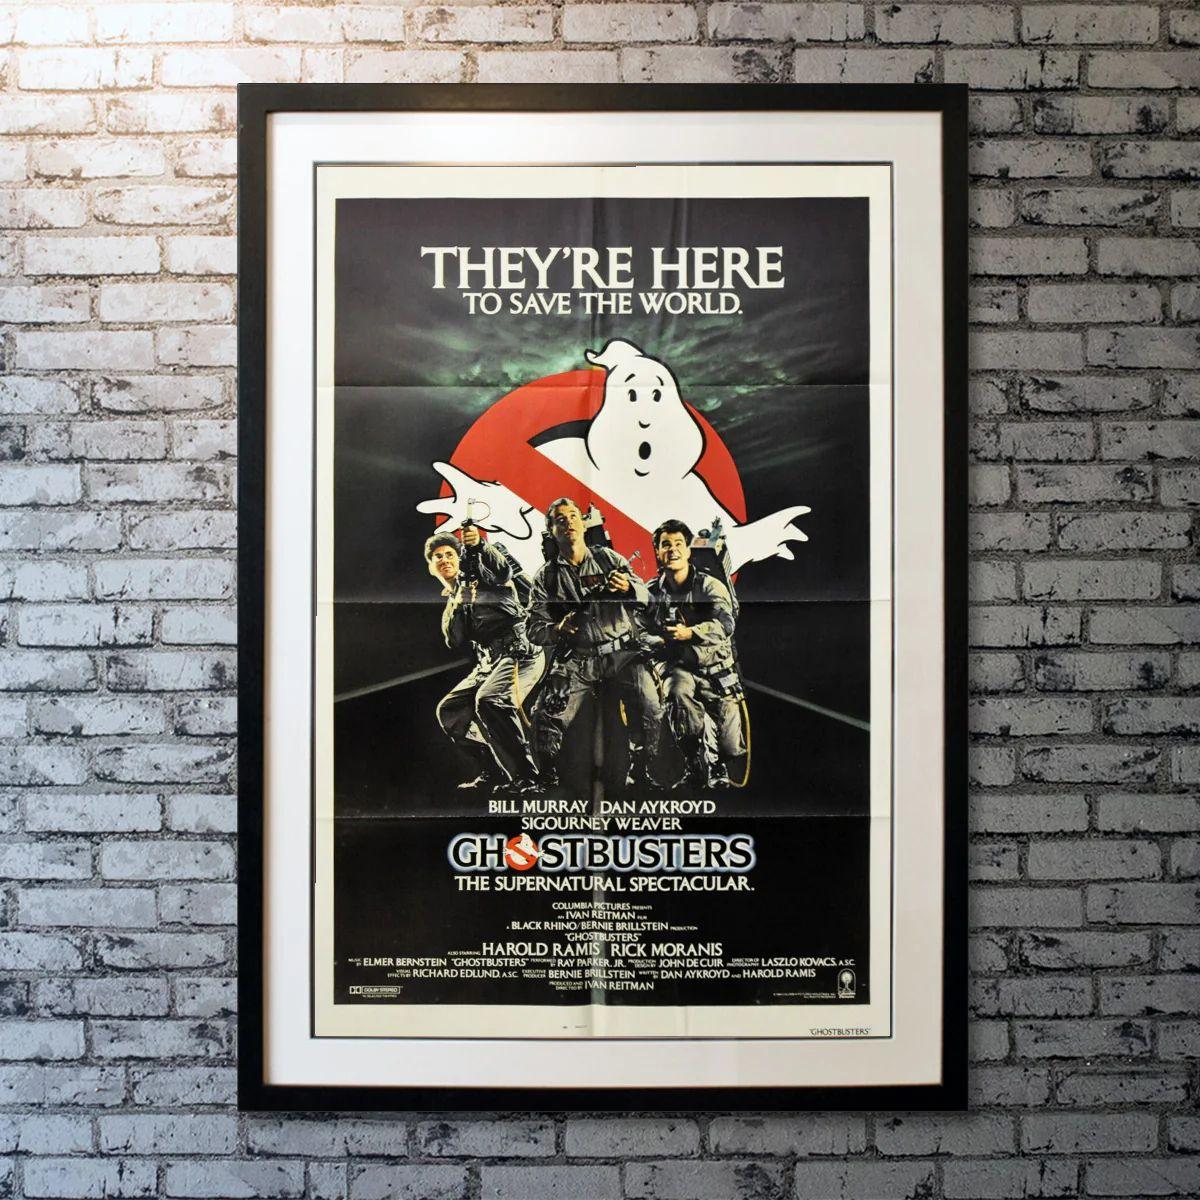 Ghostbusters, Unframed Poster, 1984

Original One Sheet (27 X 41 Inches). Three parapsychologists forced out of their university funding set up shop as a unique ghost removal service in New York City, attracting frightened yet skeptical